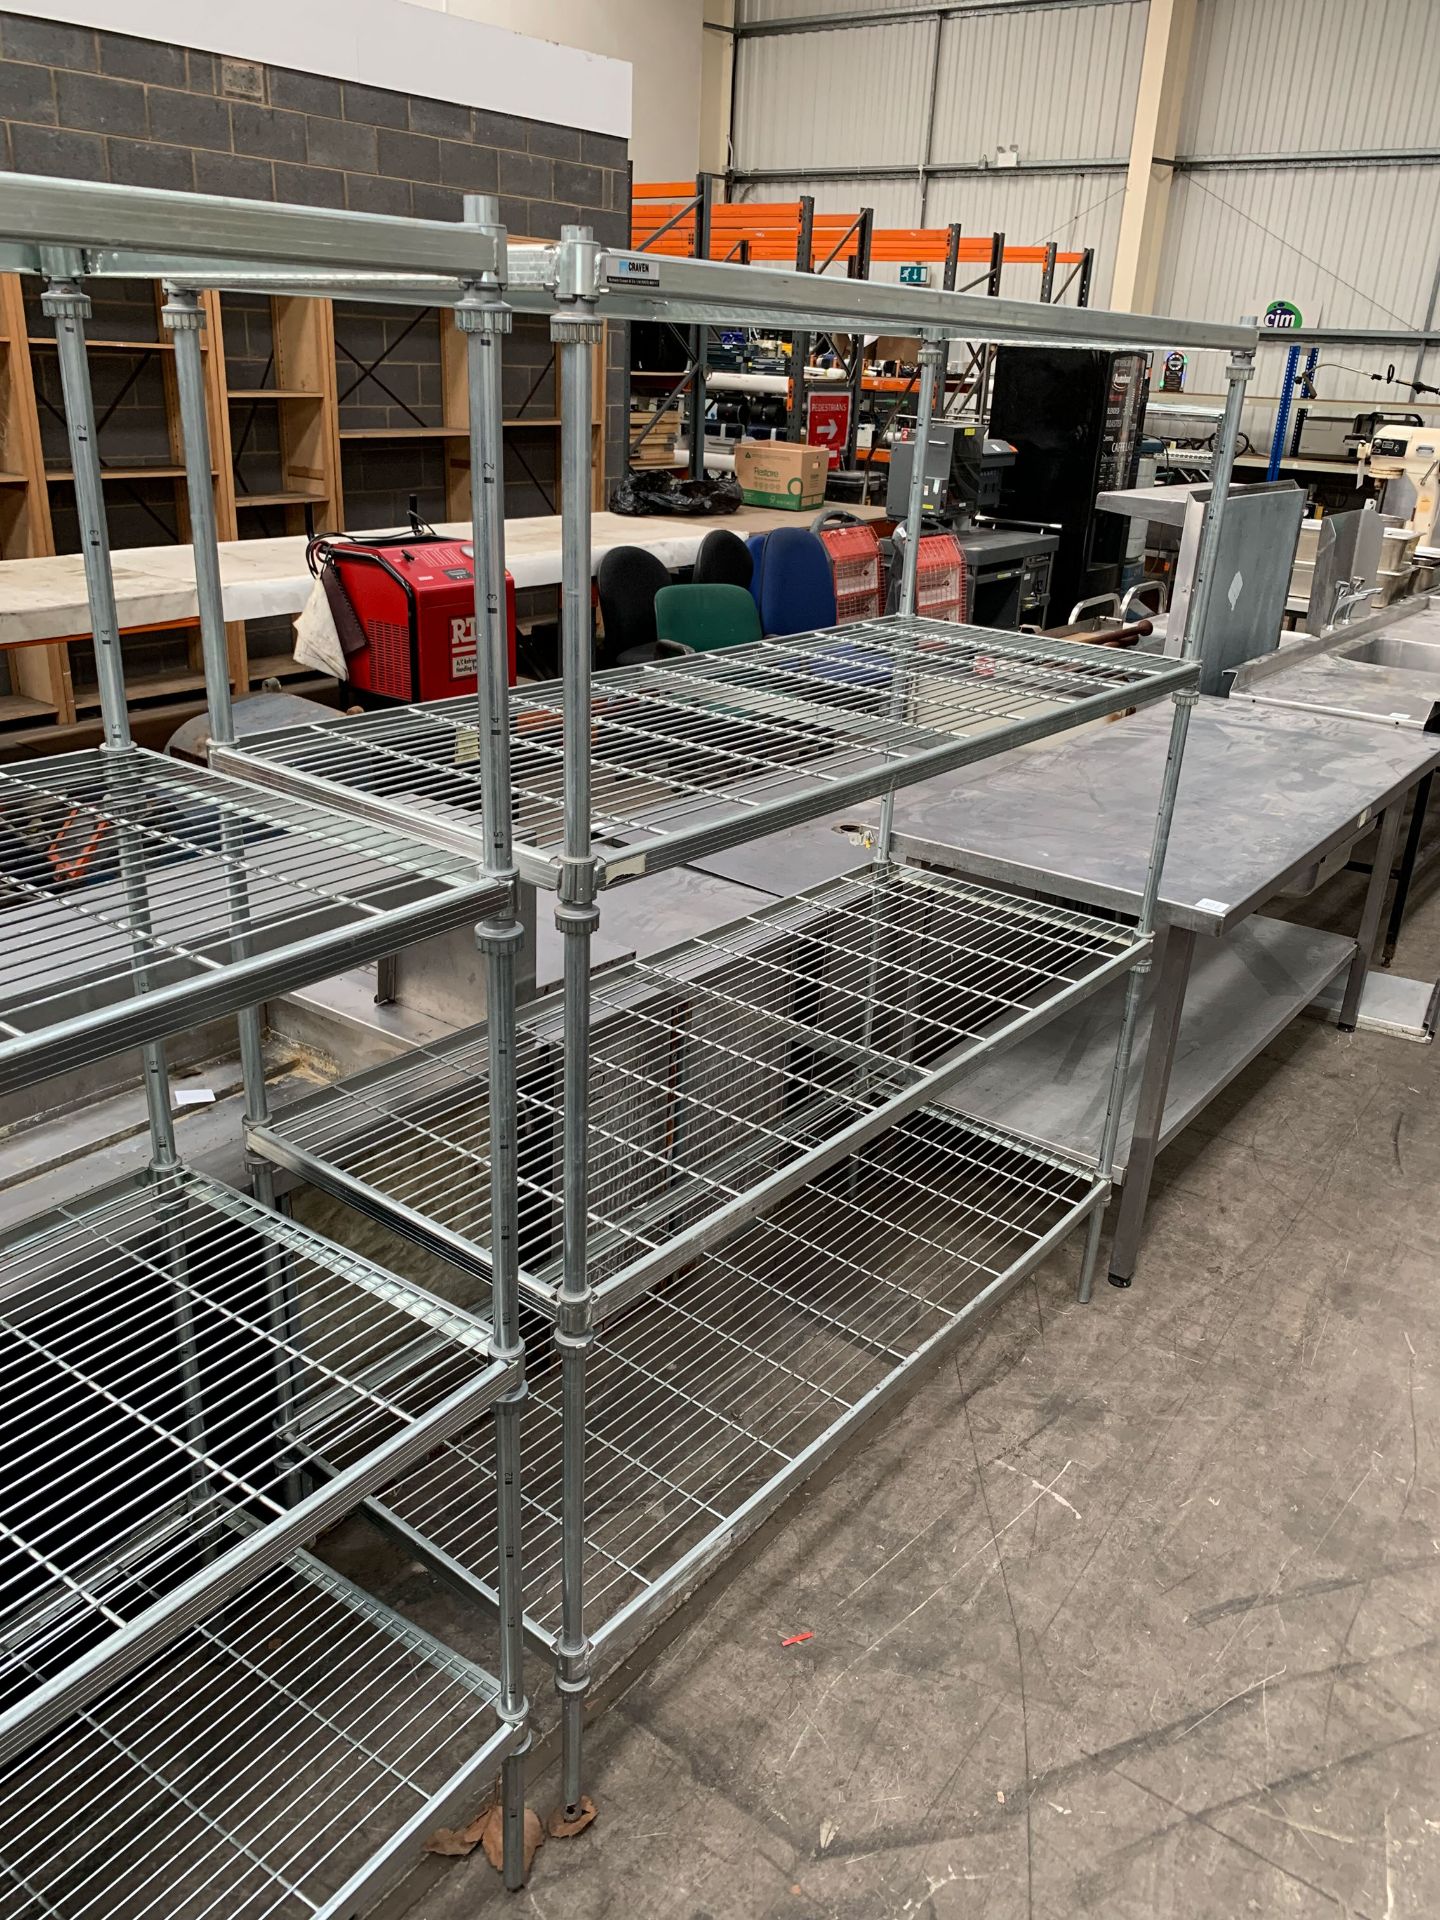 4x Boltless Wire Racks each with 4 Shelves - Image 5 of 5